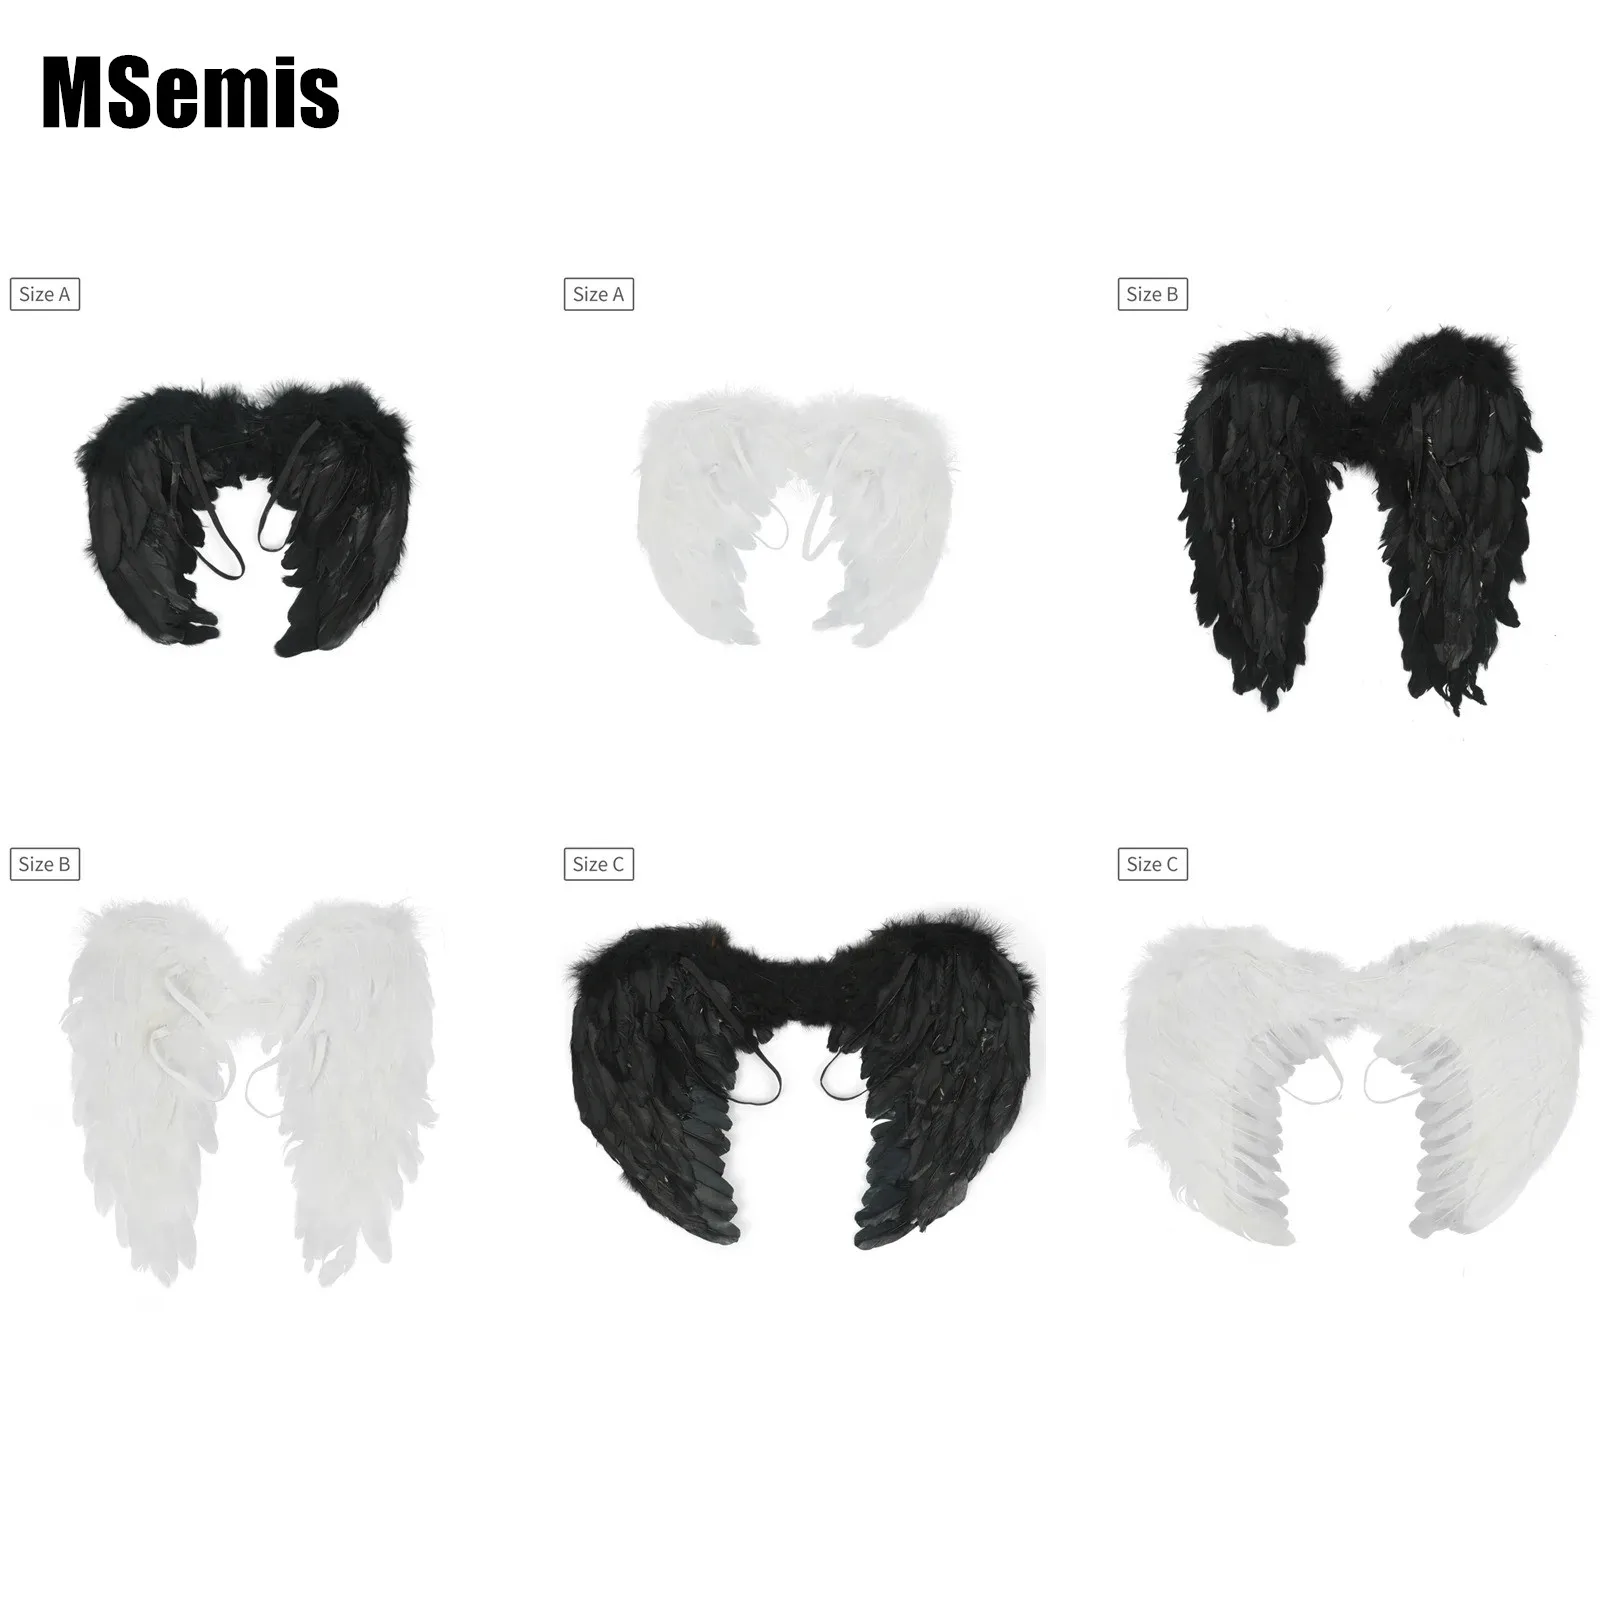 Adult Children Feather Angel Wings Elastic Band Solid Color for Halloween Christmas Cosplay Costume kids children glossy metallic angel wings cosplay masquerade performance fancy dress costume accessory photography props wings